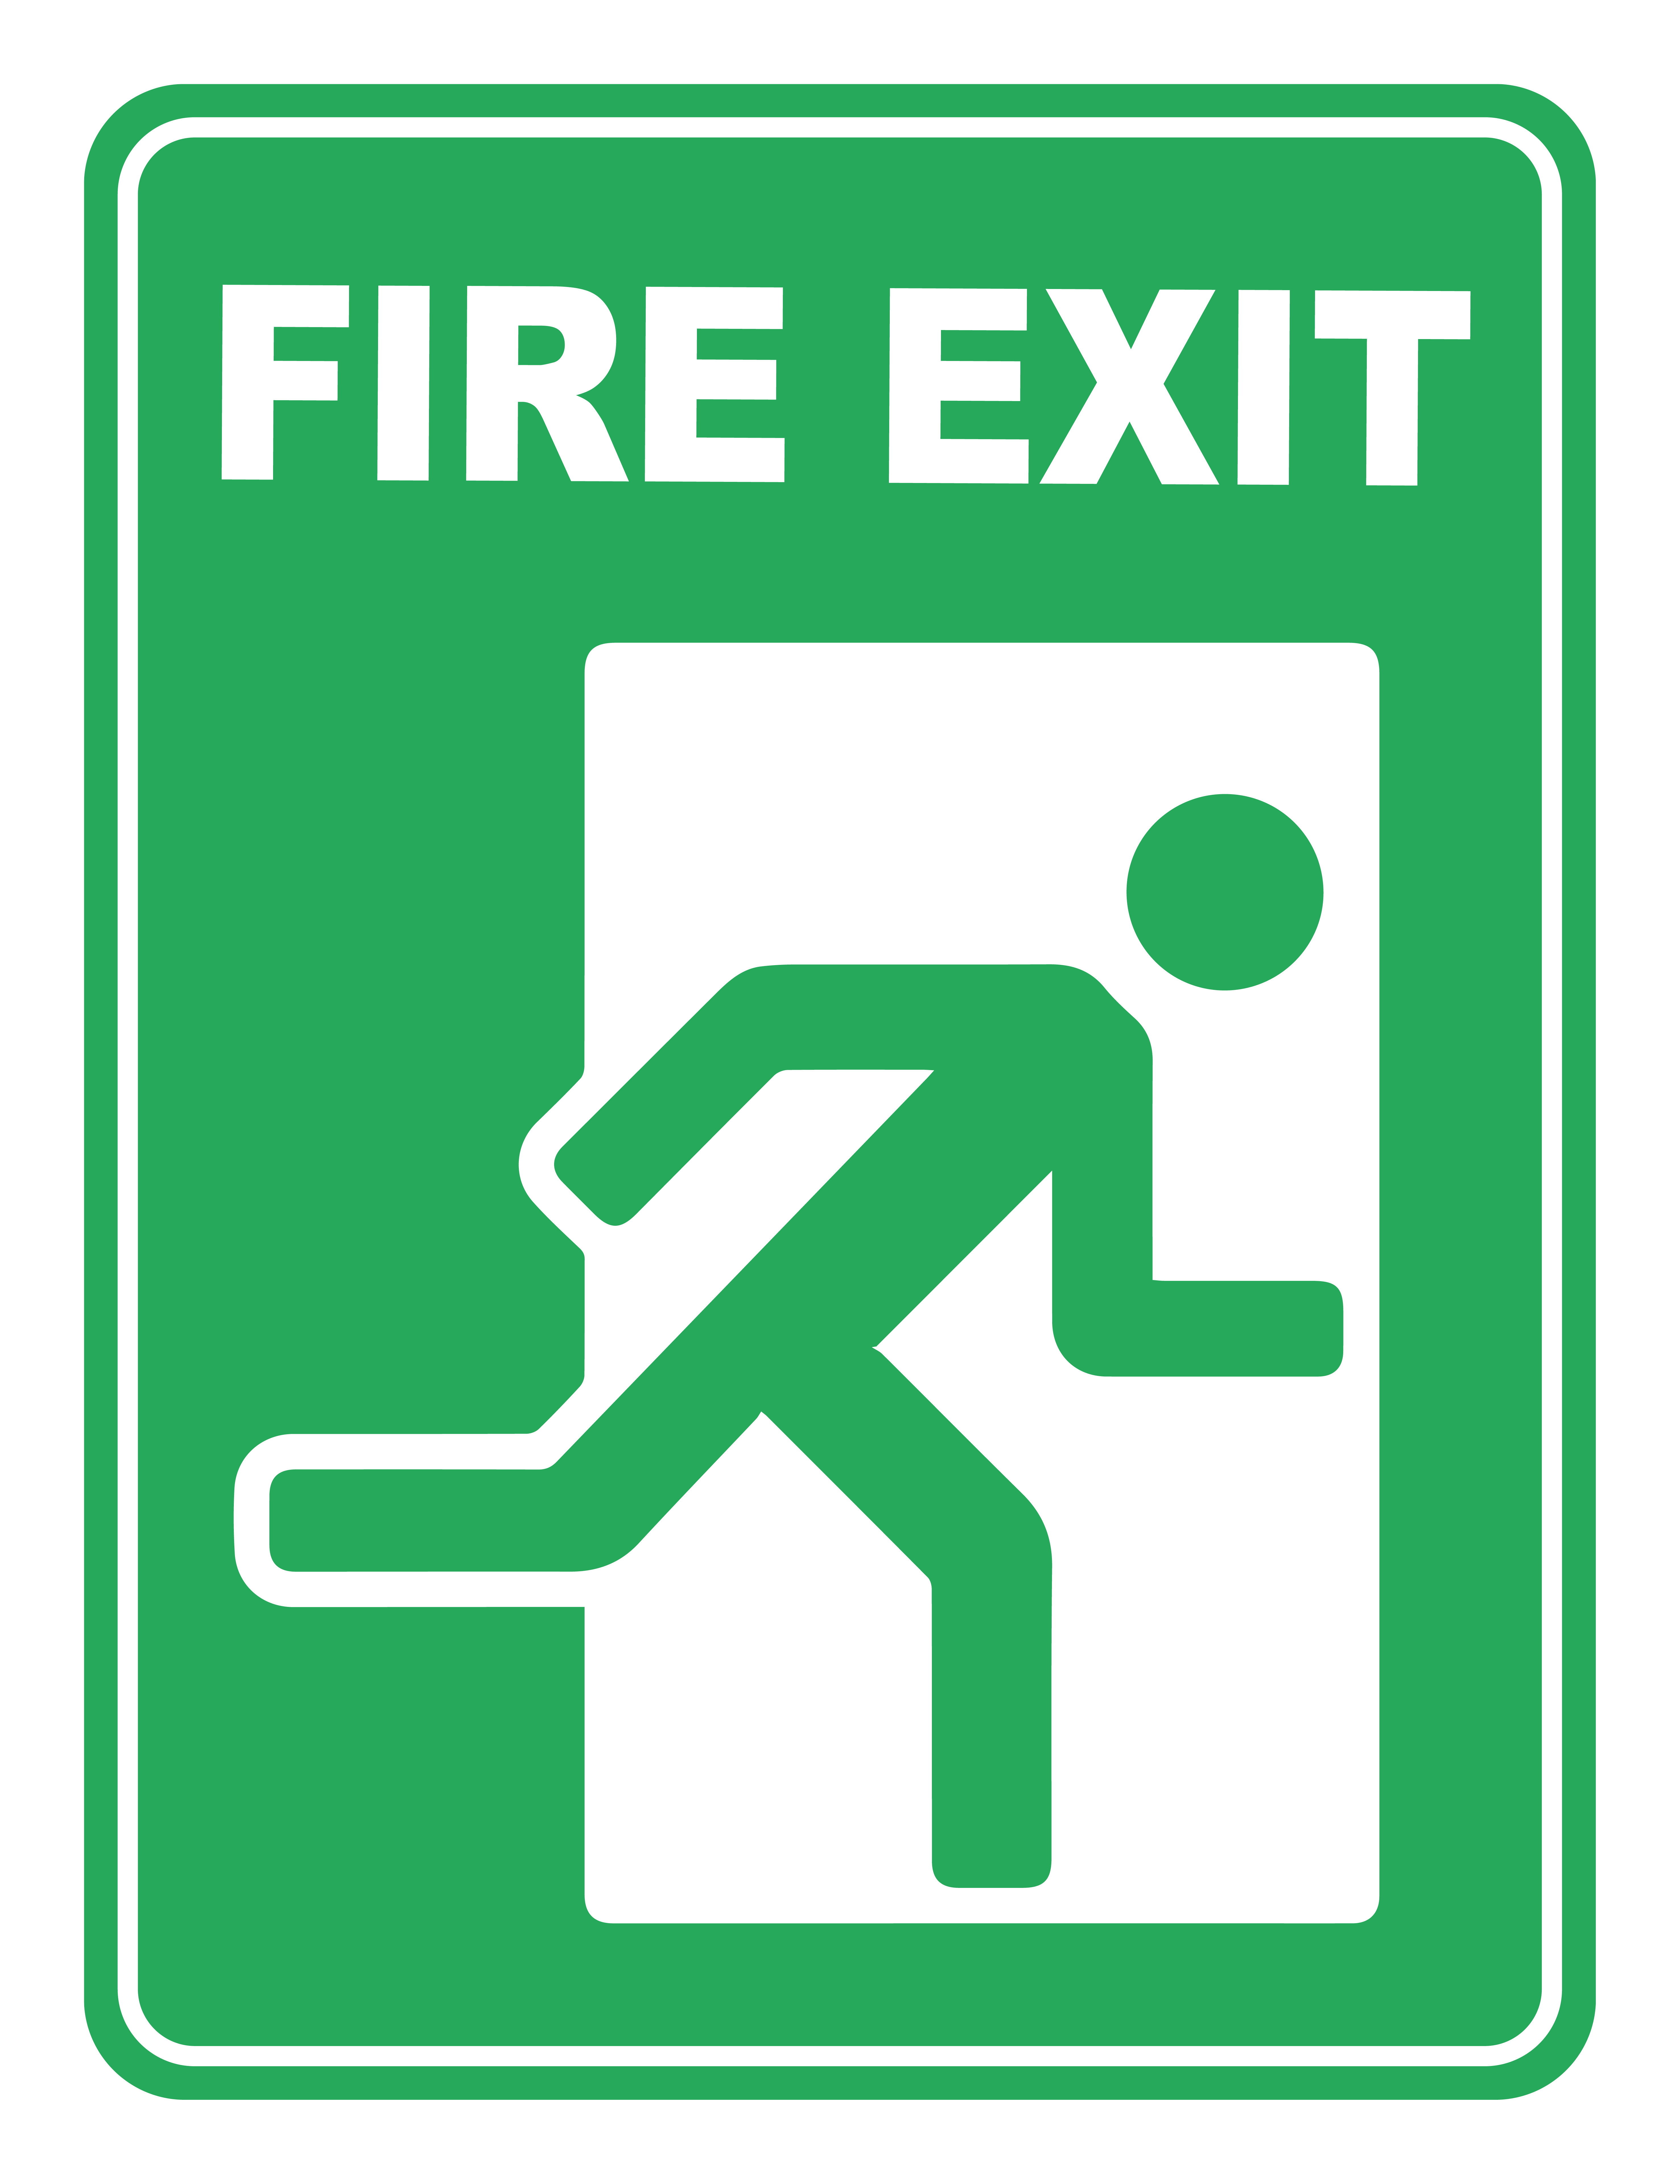 Fire Exit Running Man FiSign Safety Signs Australian Made Quality Printed Sign 